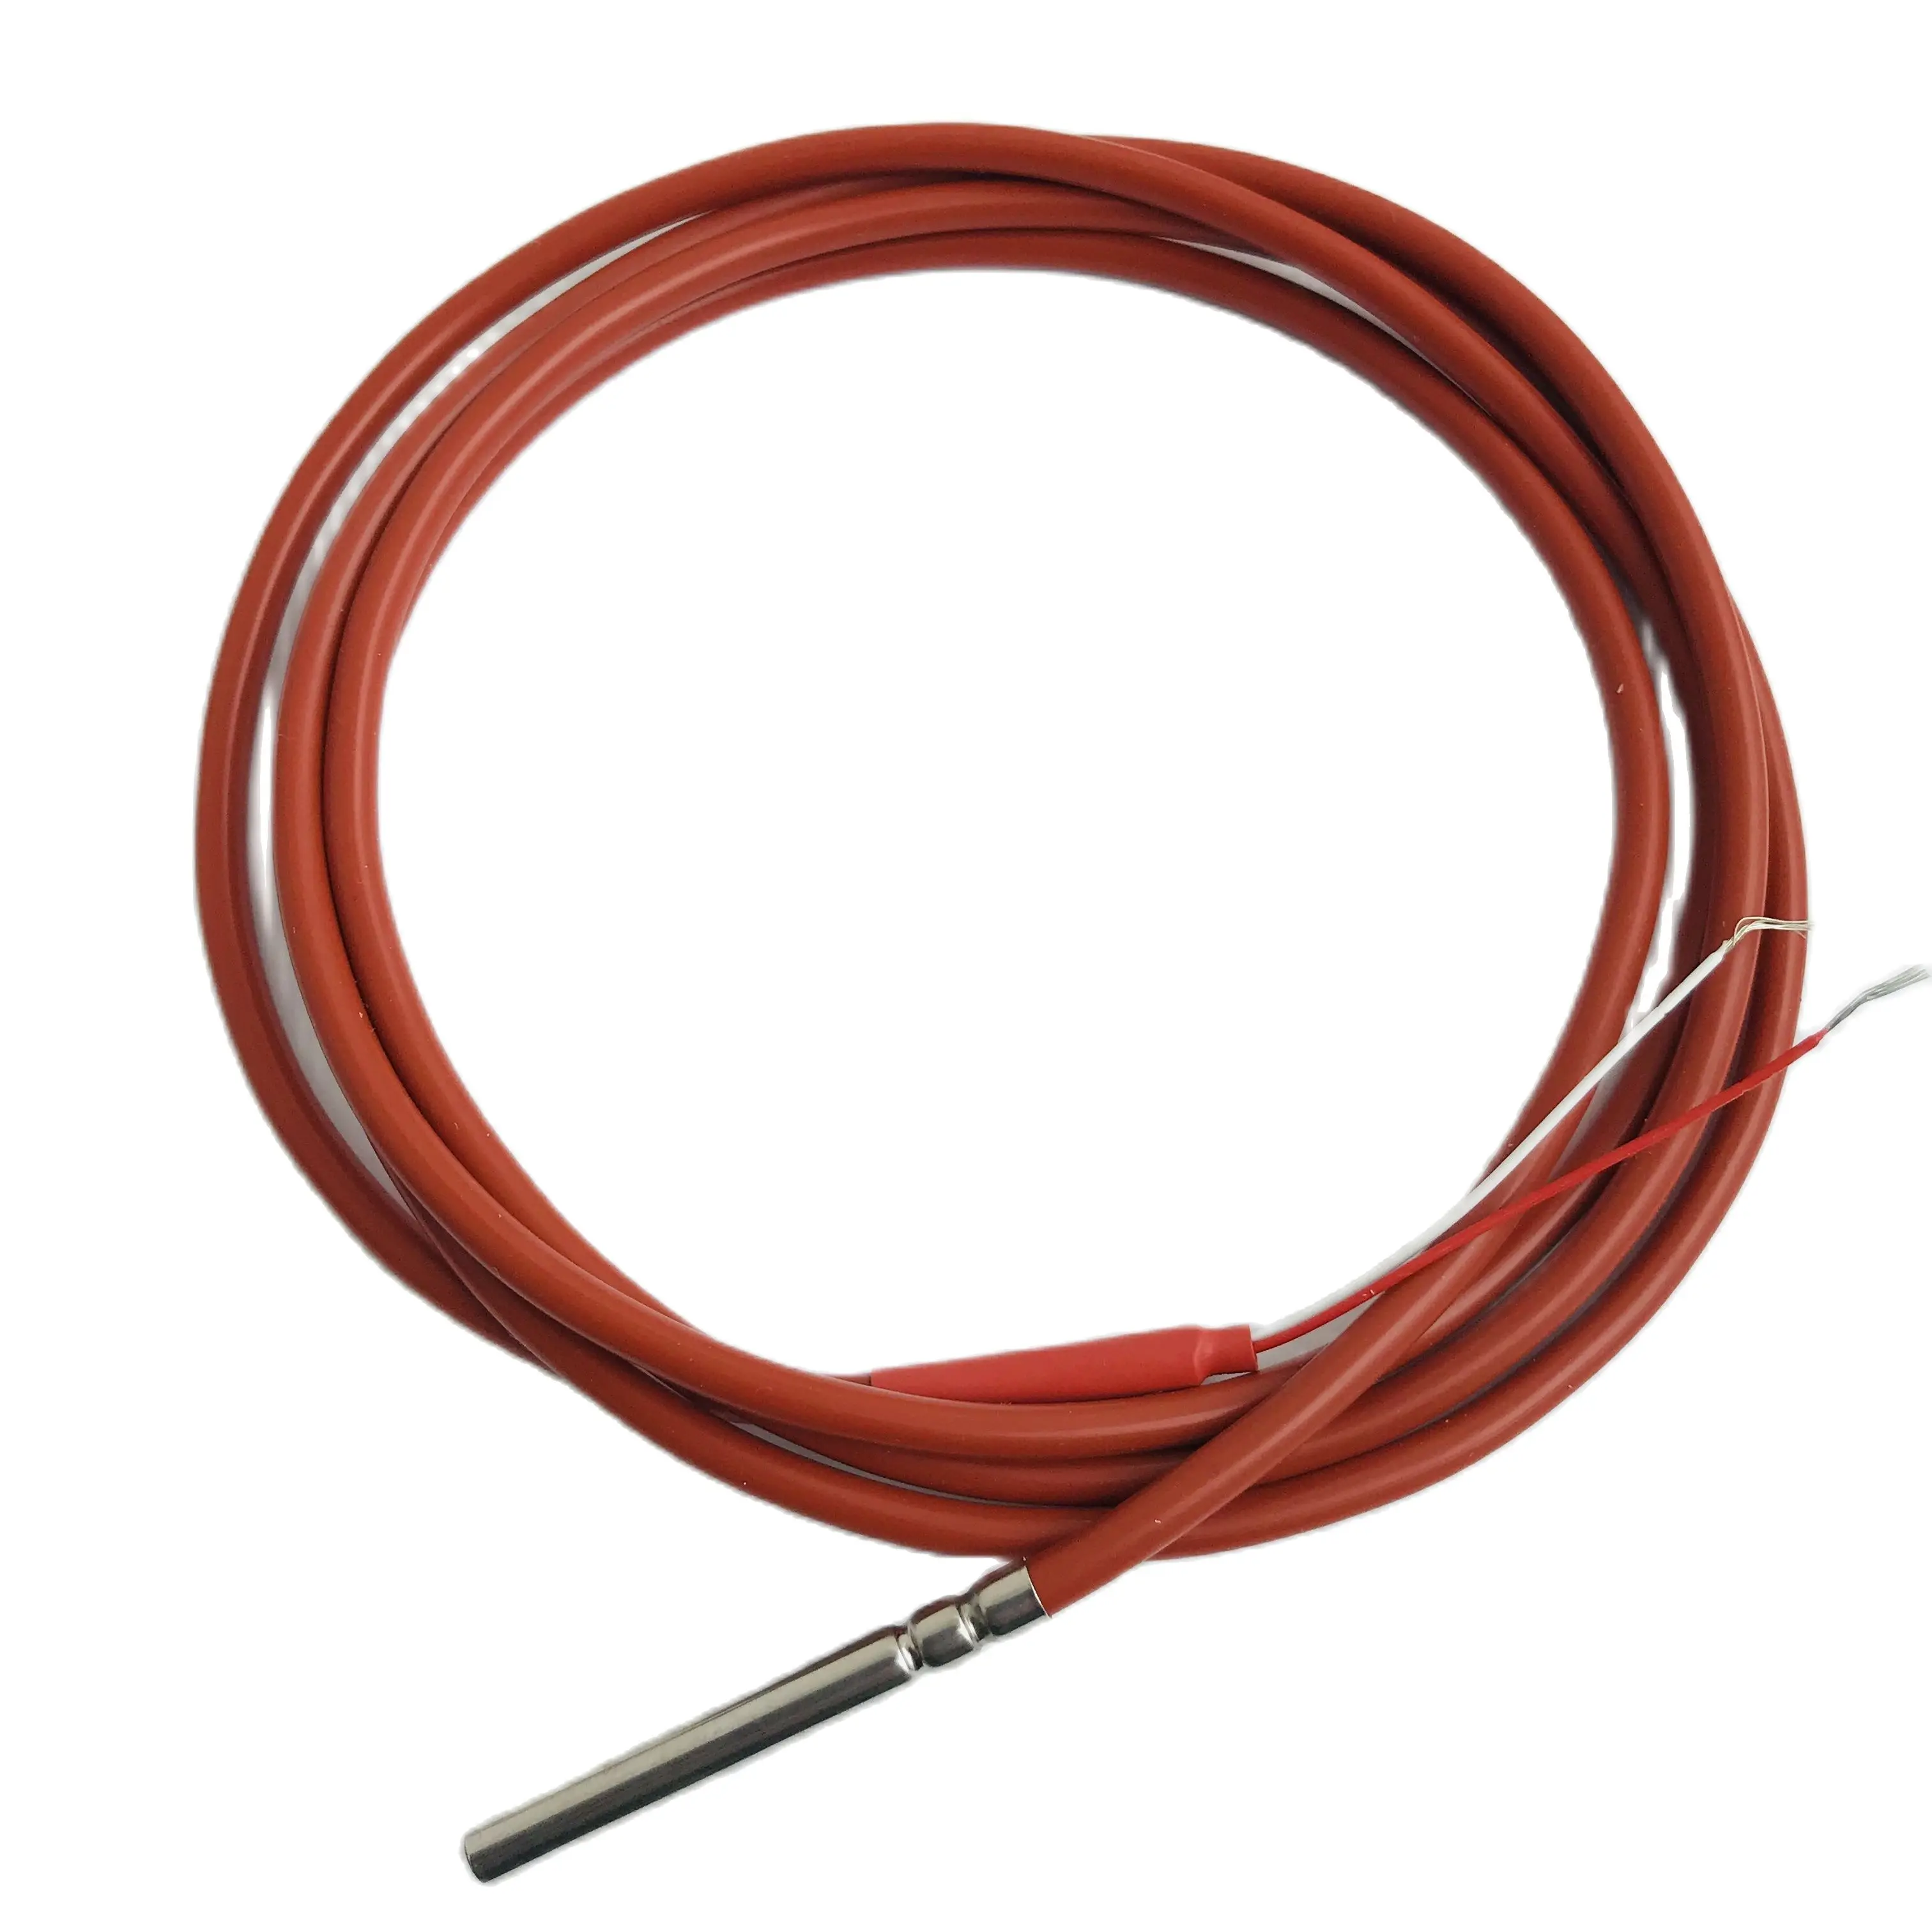 1.5 Meters PT100 Temperature Sensor Class B 2 Wires Silicone Gel Coated Probe 45mm*5mm Length*Dia. -50-180 centigrade